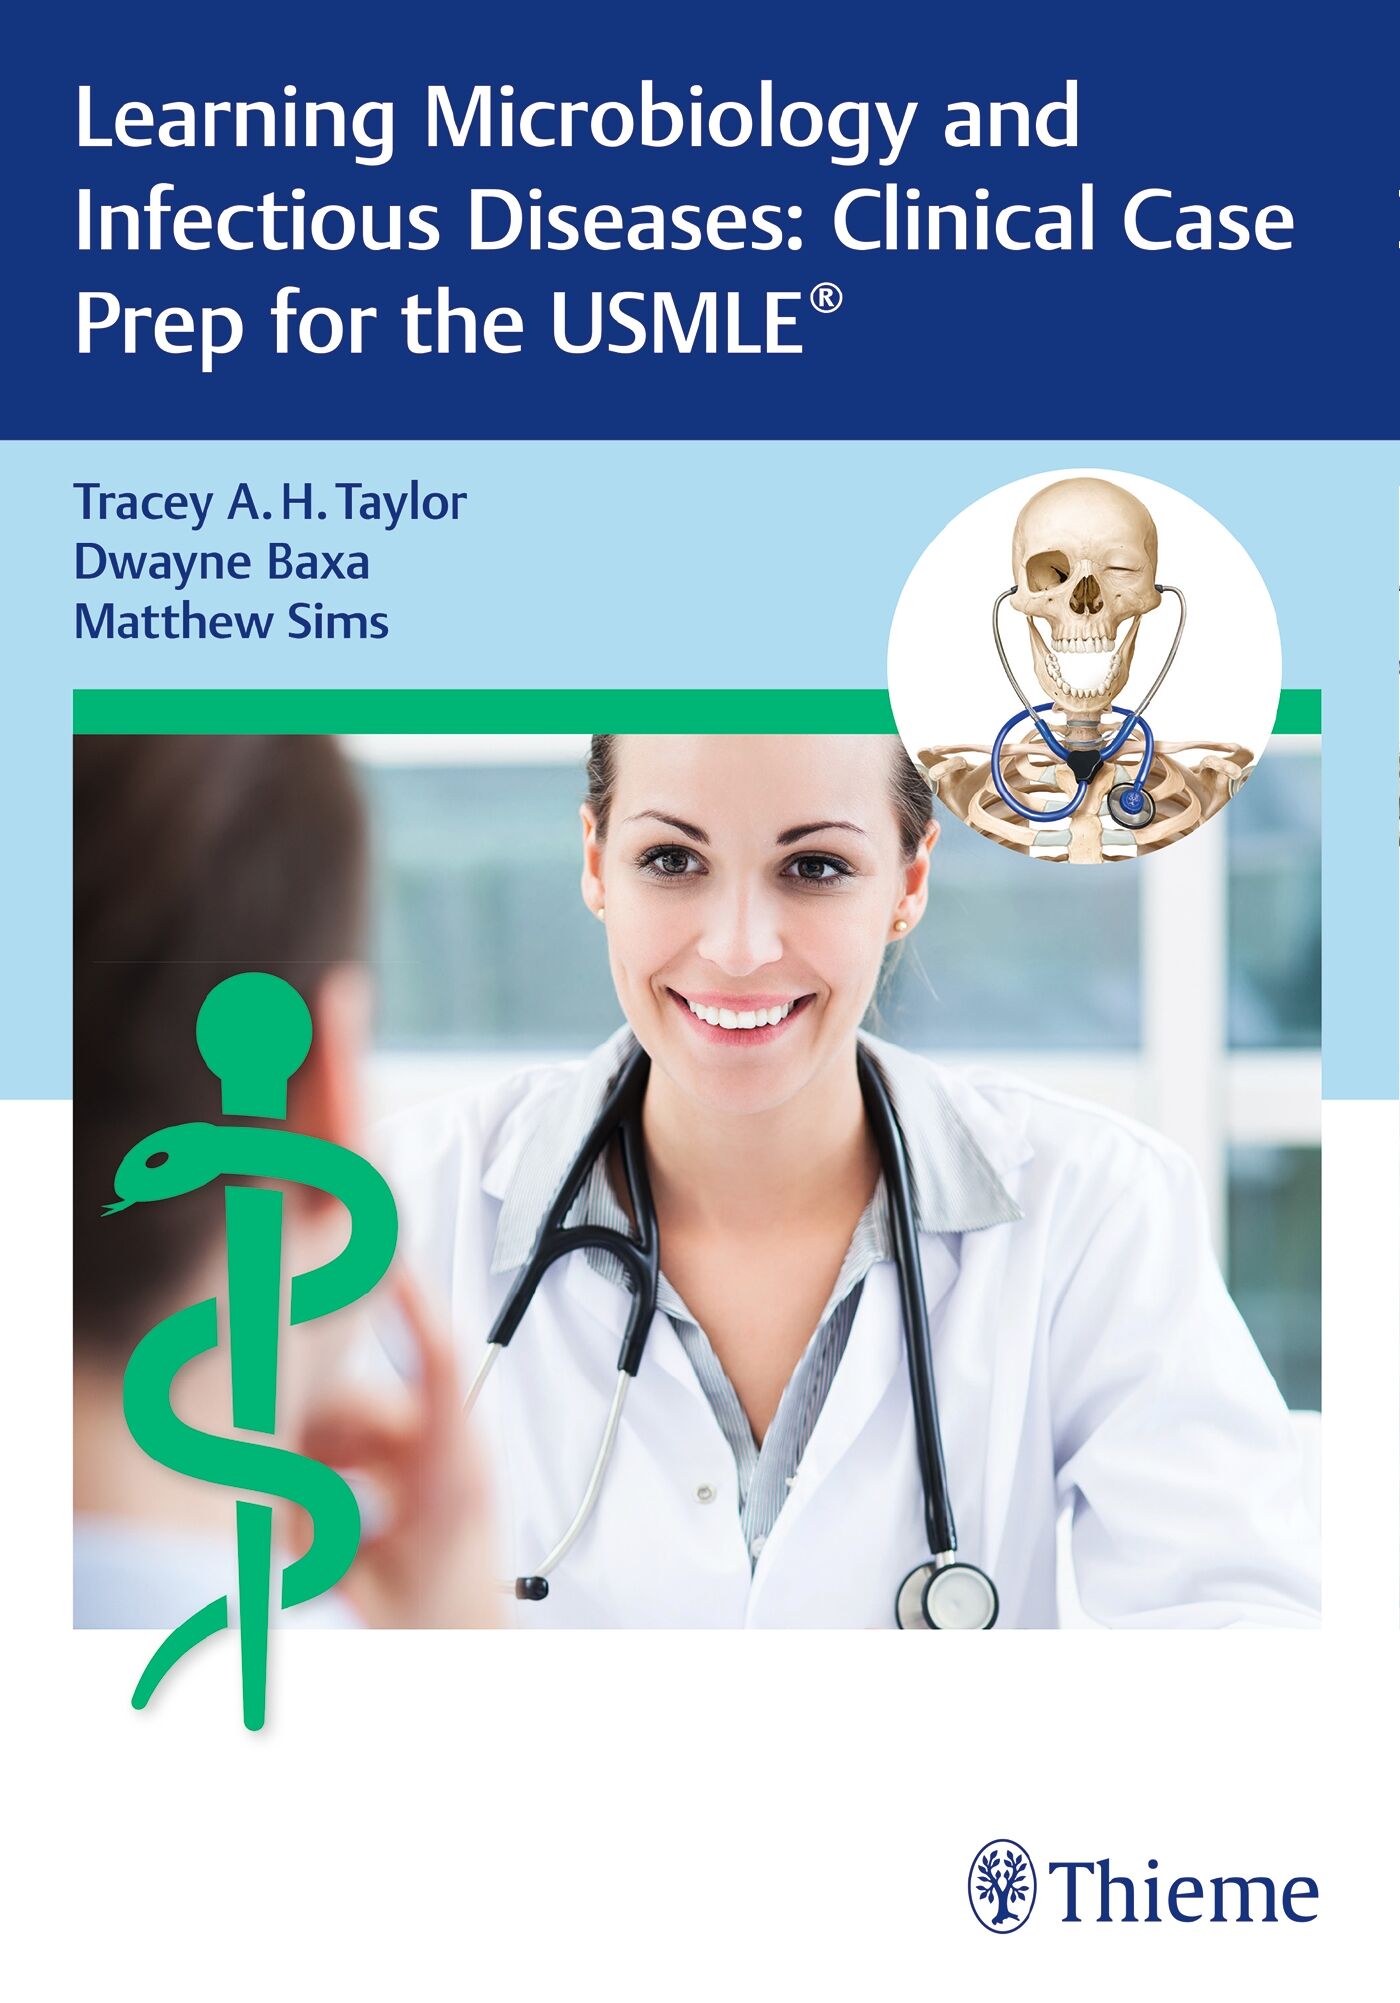 Learning Microbiology and Infectious Diseases: Clinical Case Prep for the USMLE®, 9781626235083